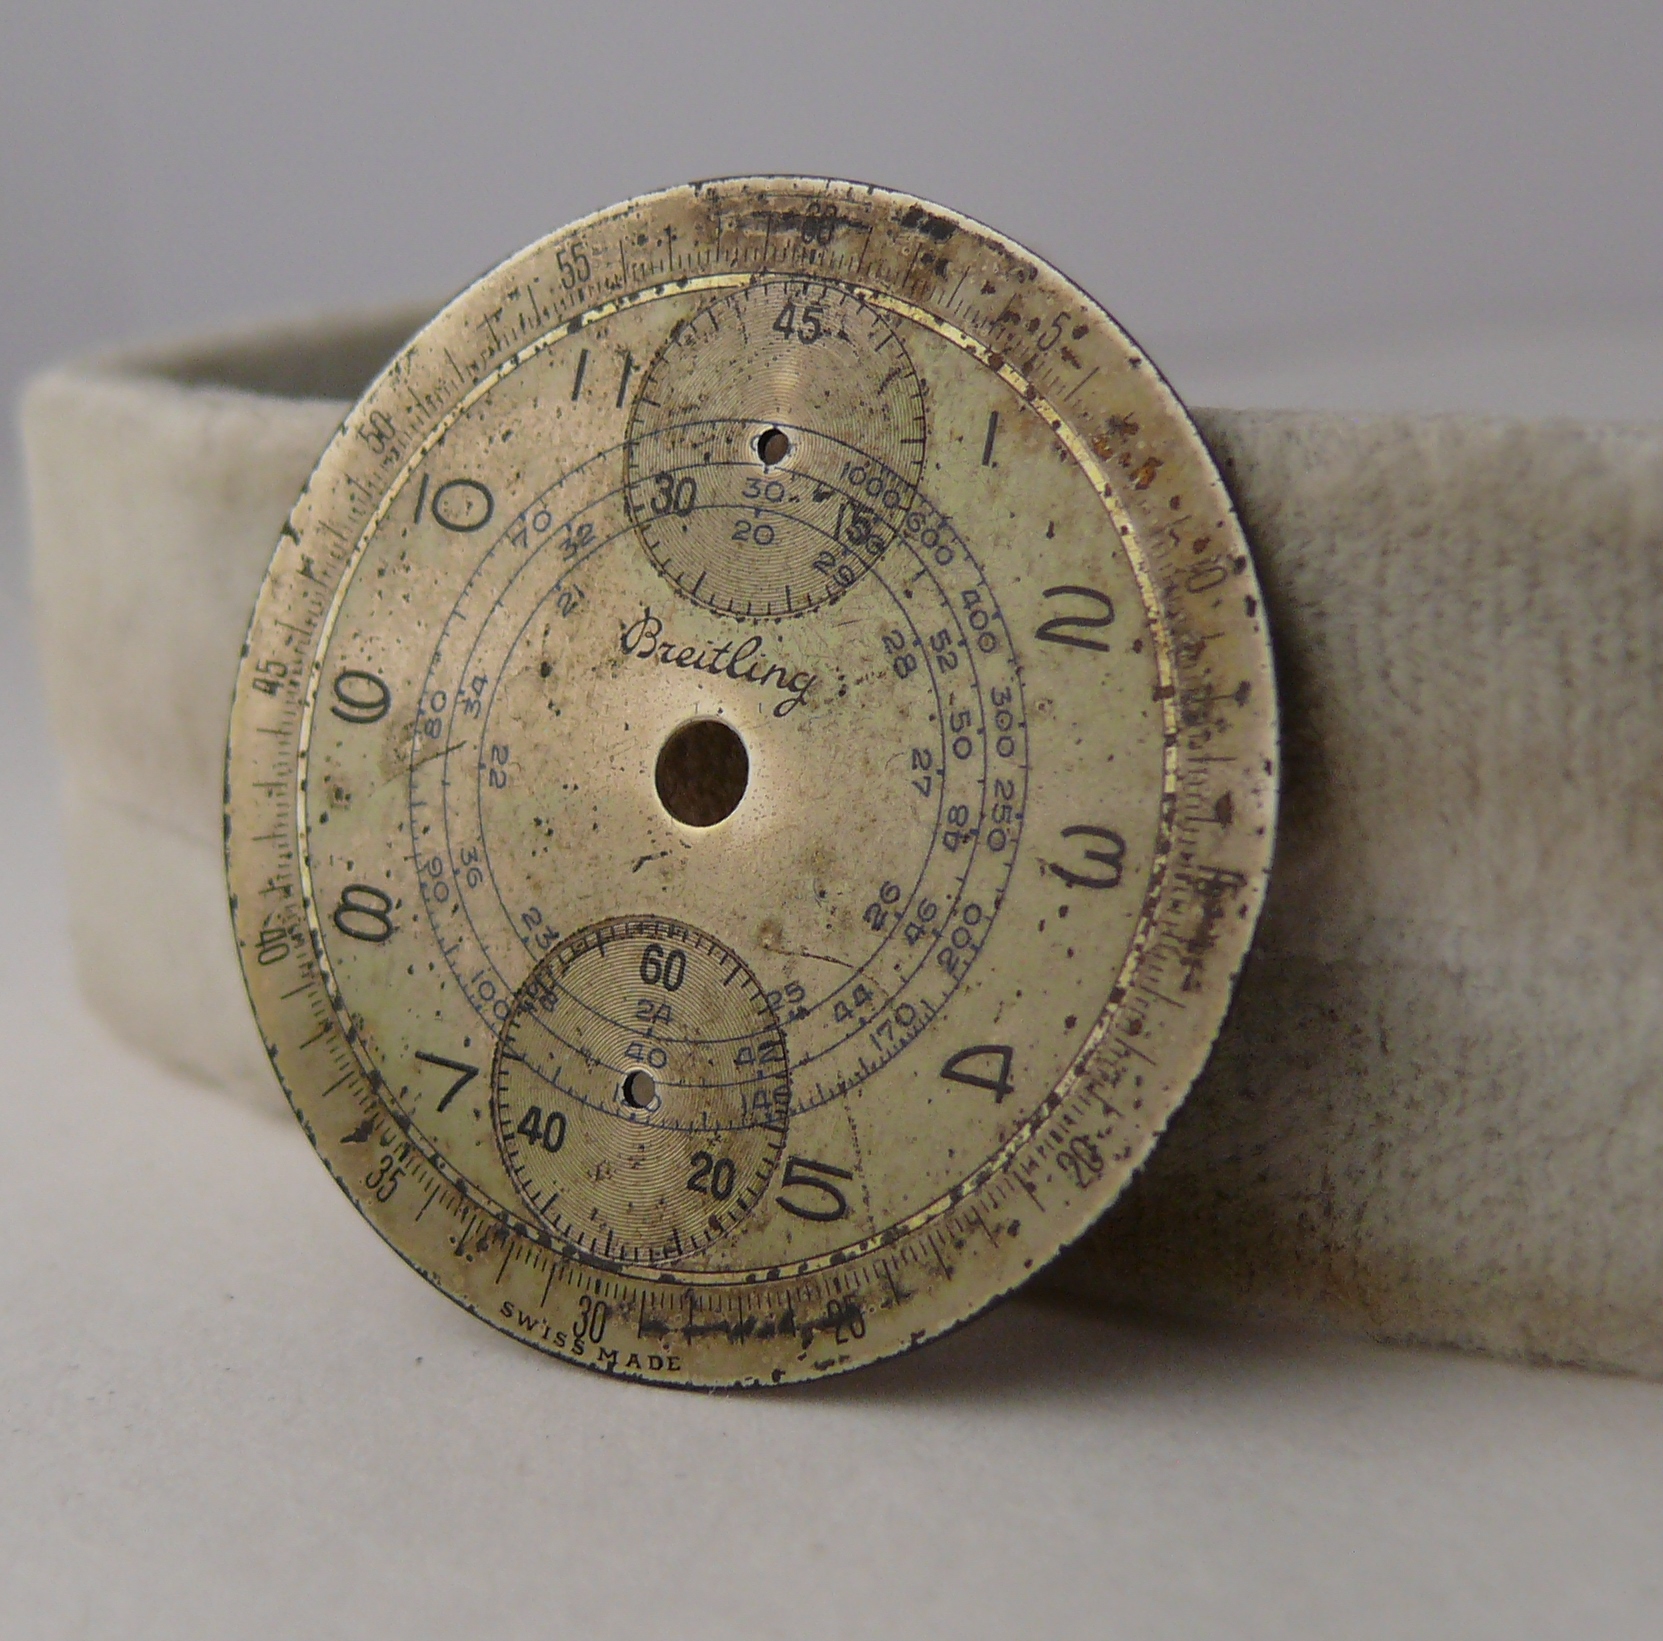 EARLY Vintage Breitling Up & Down Chronograph Dial. Suitable for parts projects or being restored. - Image 2 of 5